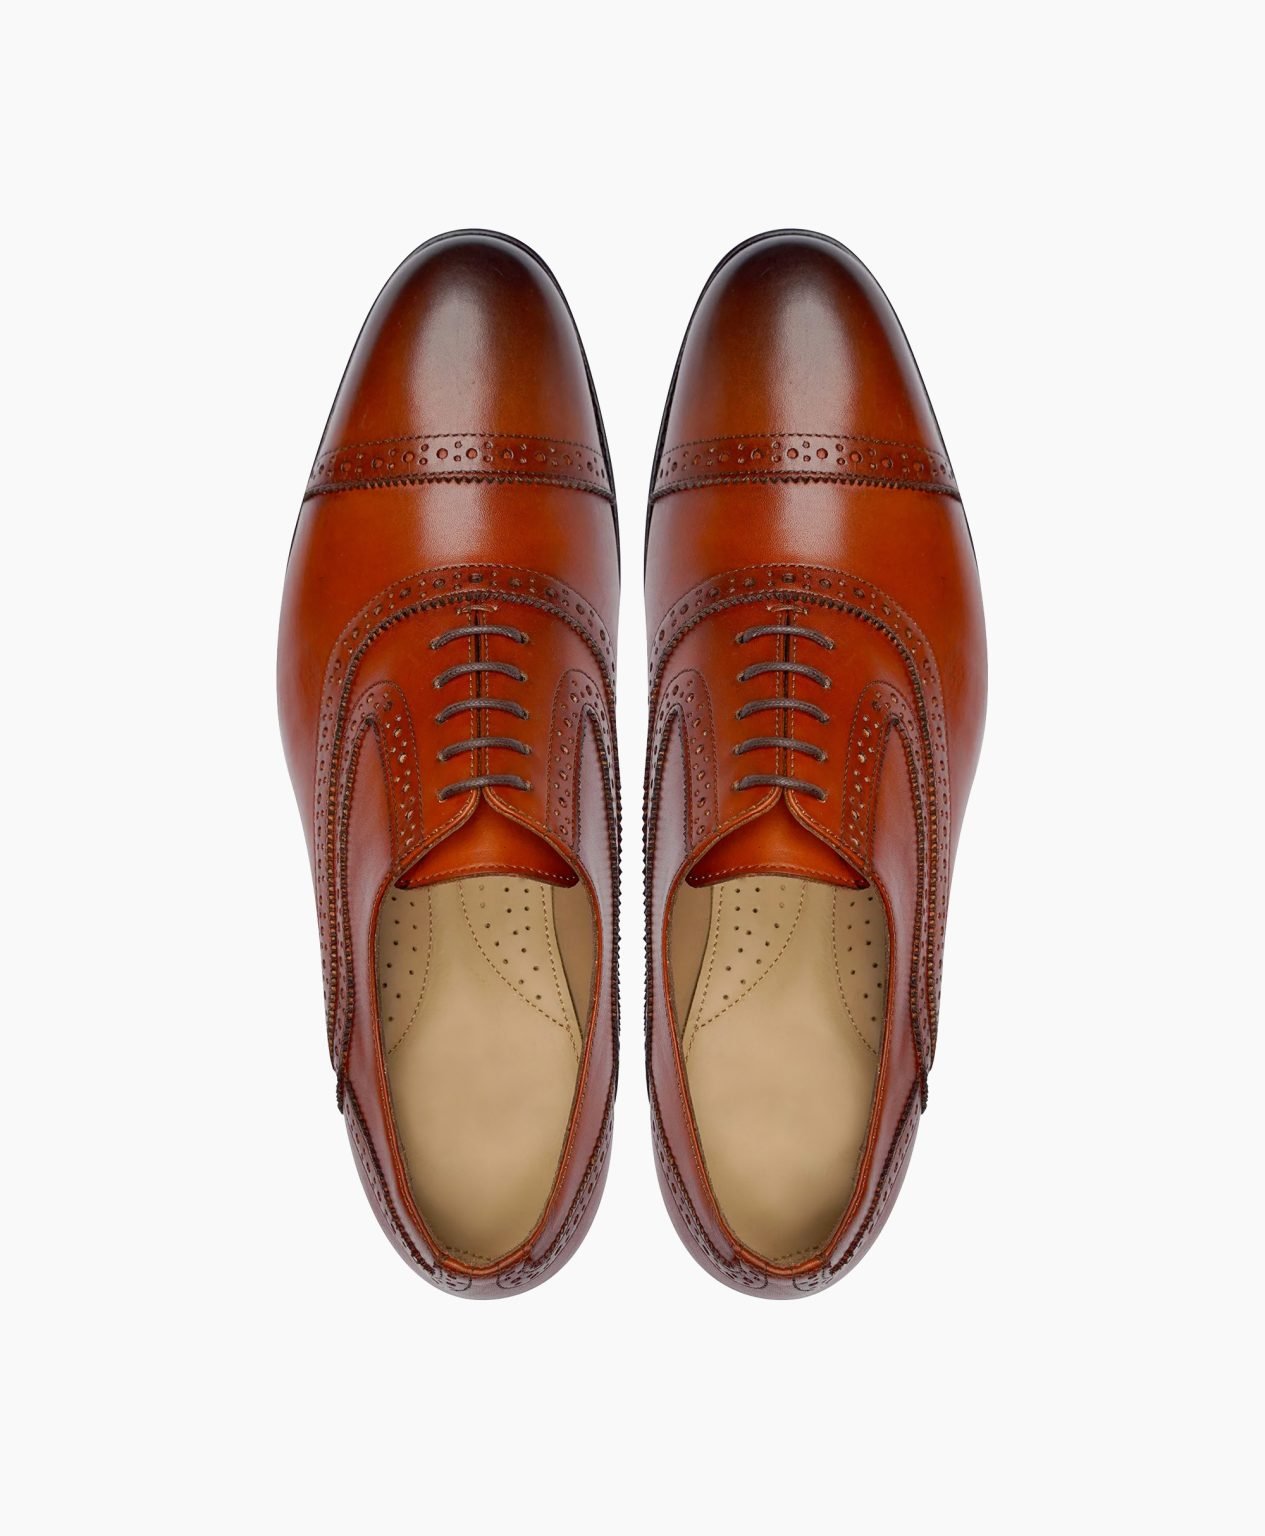 chester-oxford-tan-brown-leather-shoes-image202